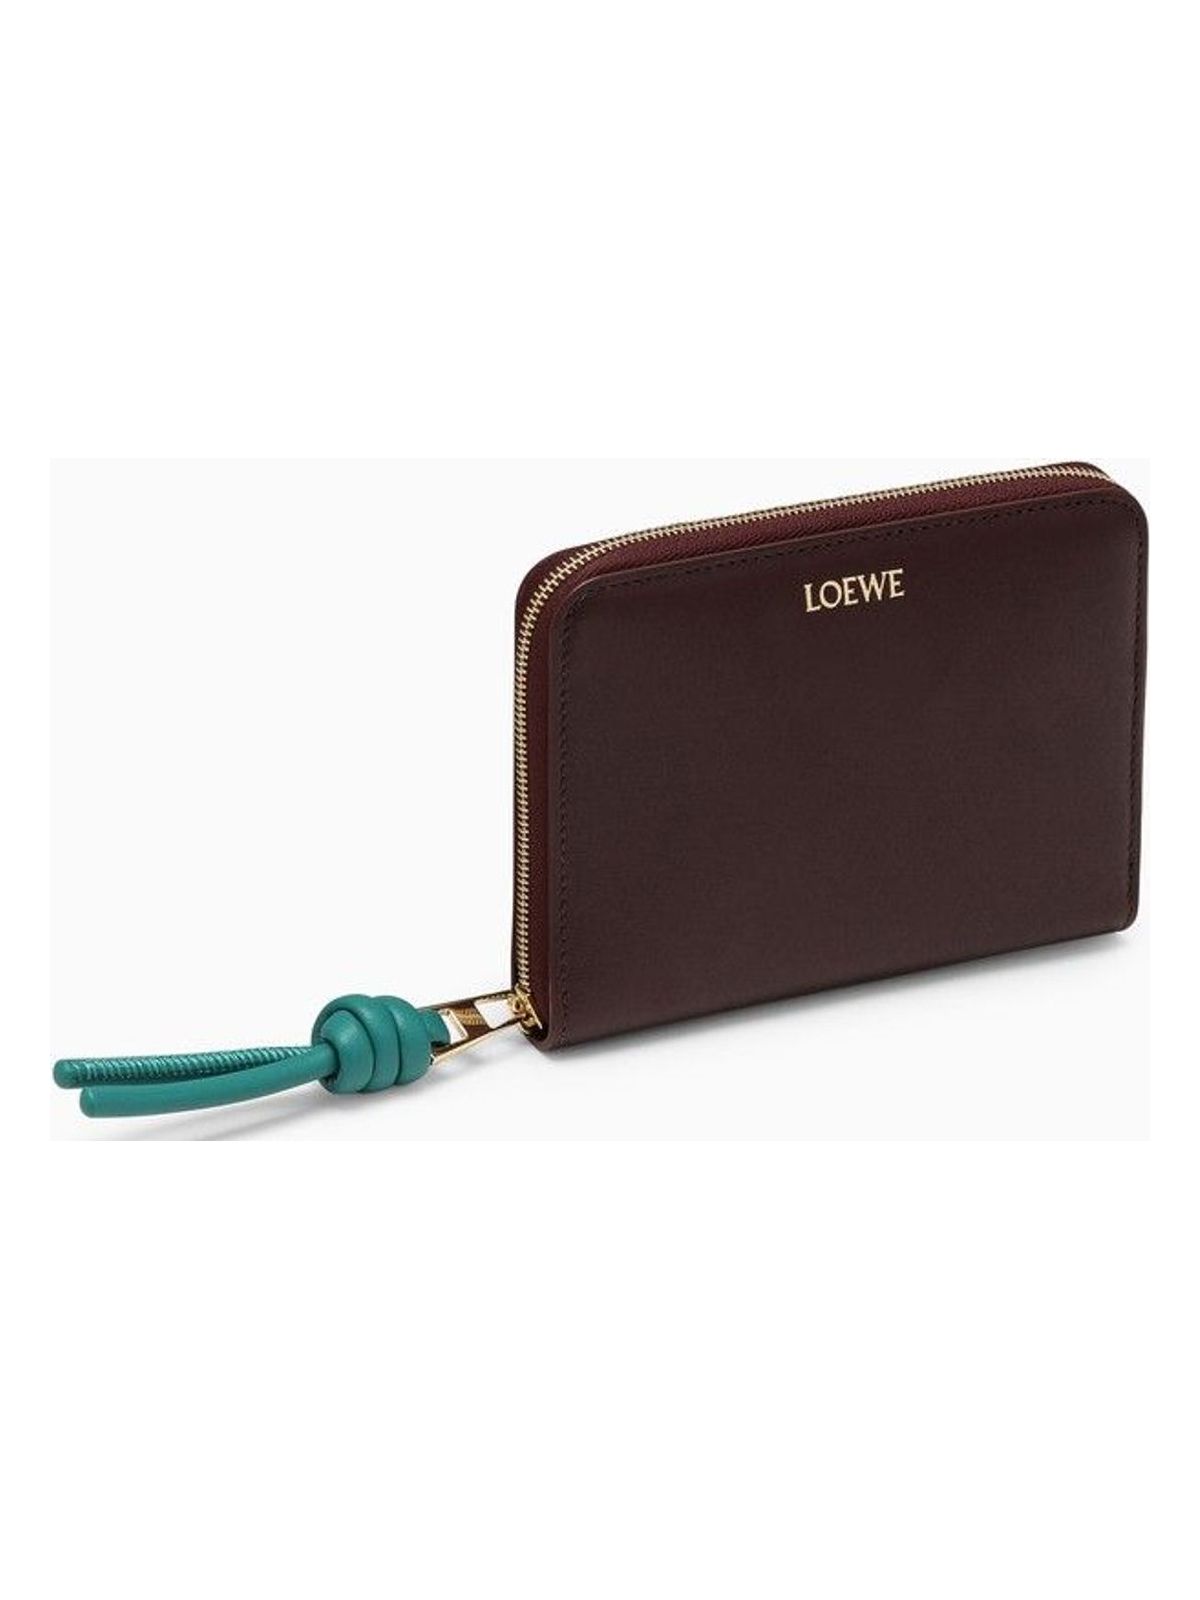 6894 LOEWE  KNOT COMPACT ZIPPED WALLET IN BURGUNDY LEATHER